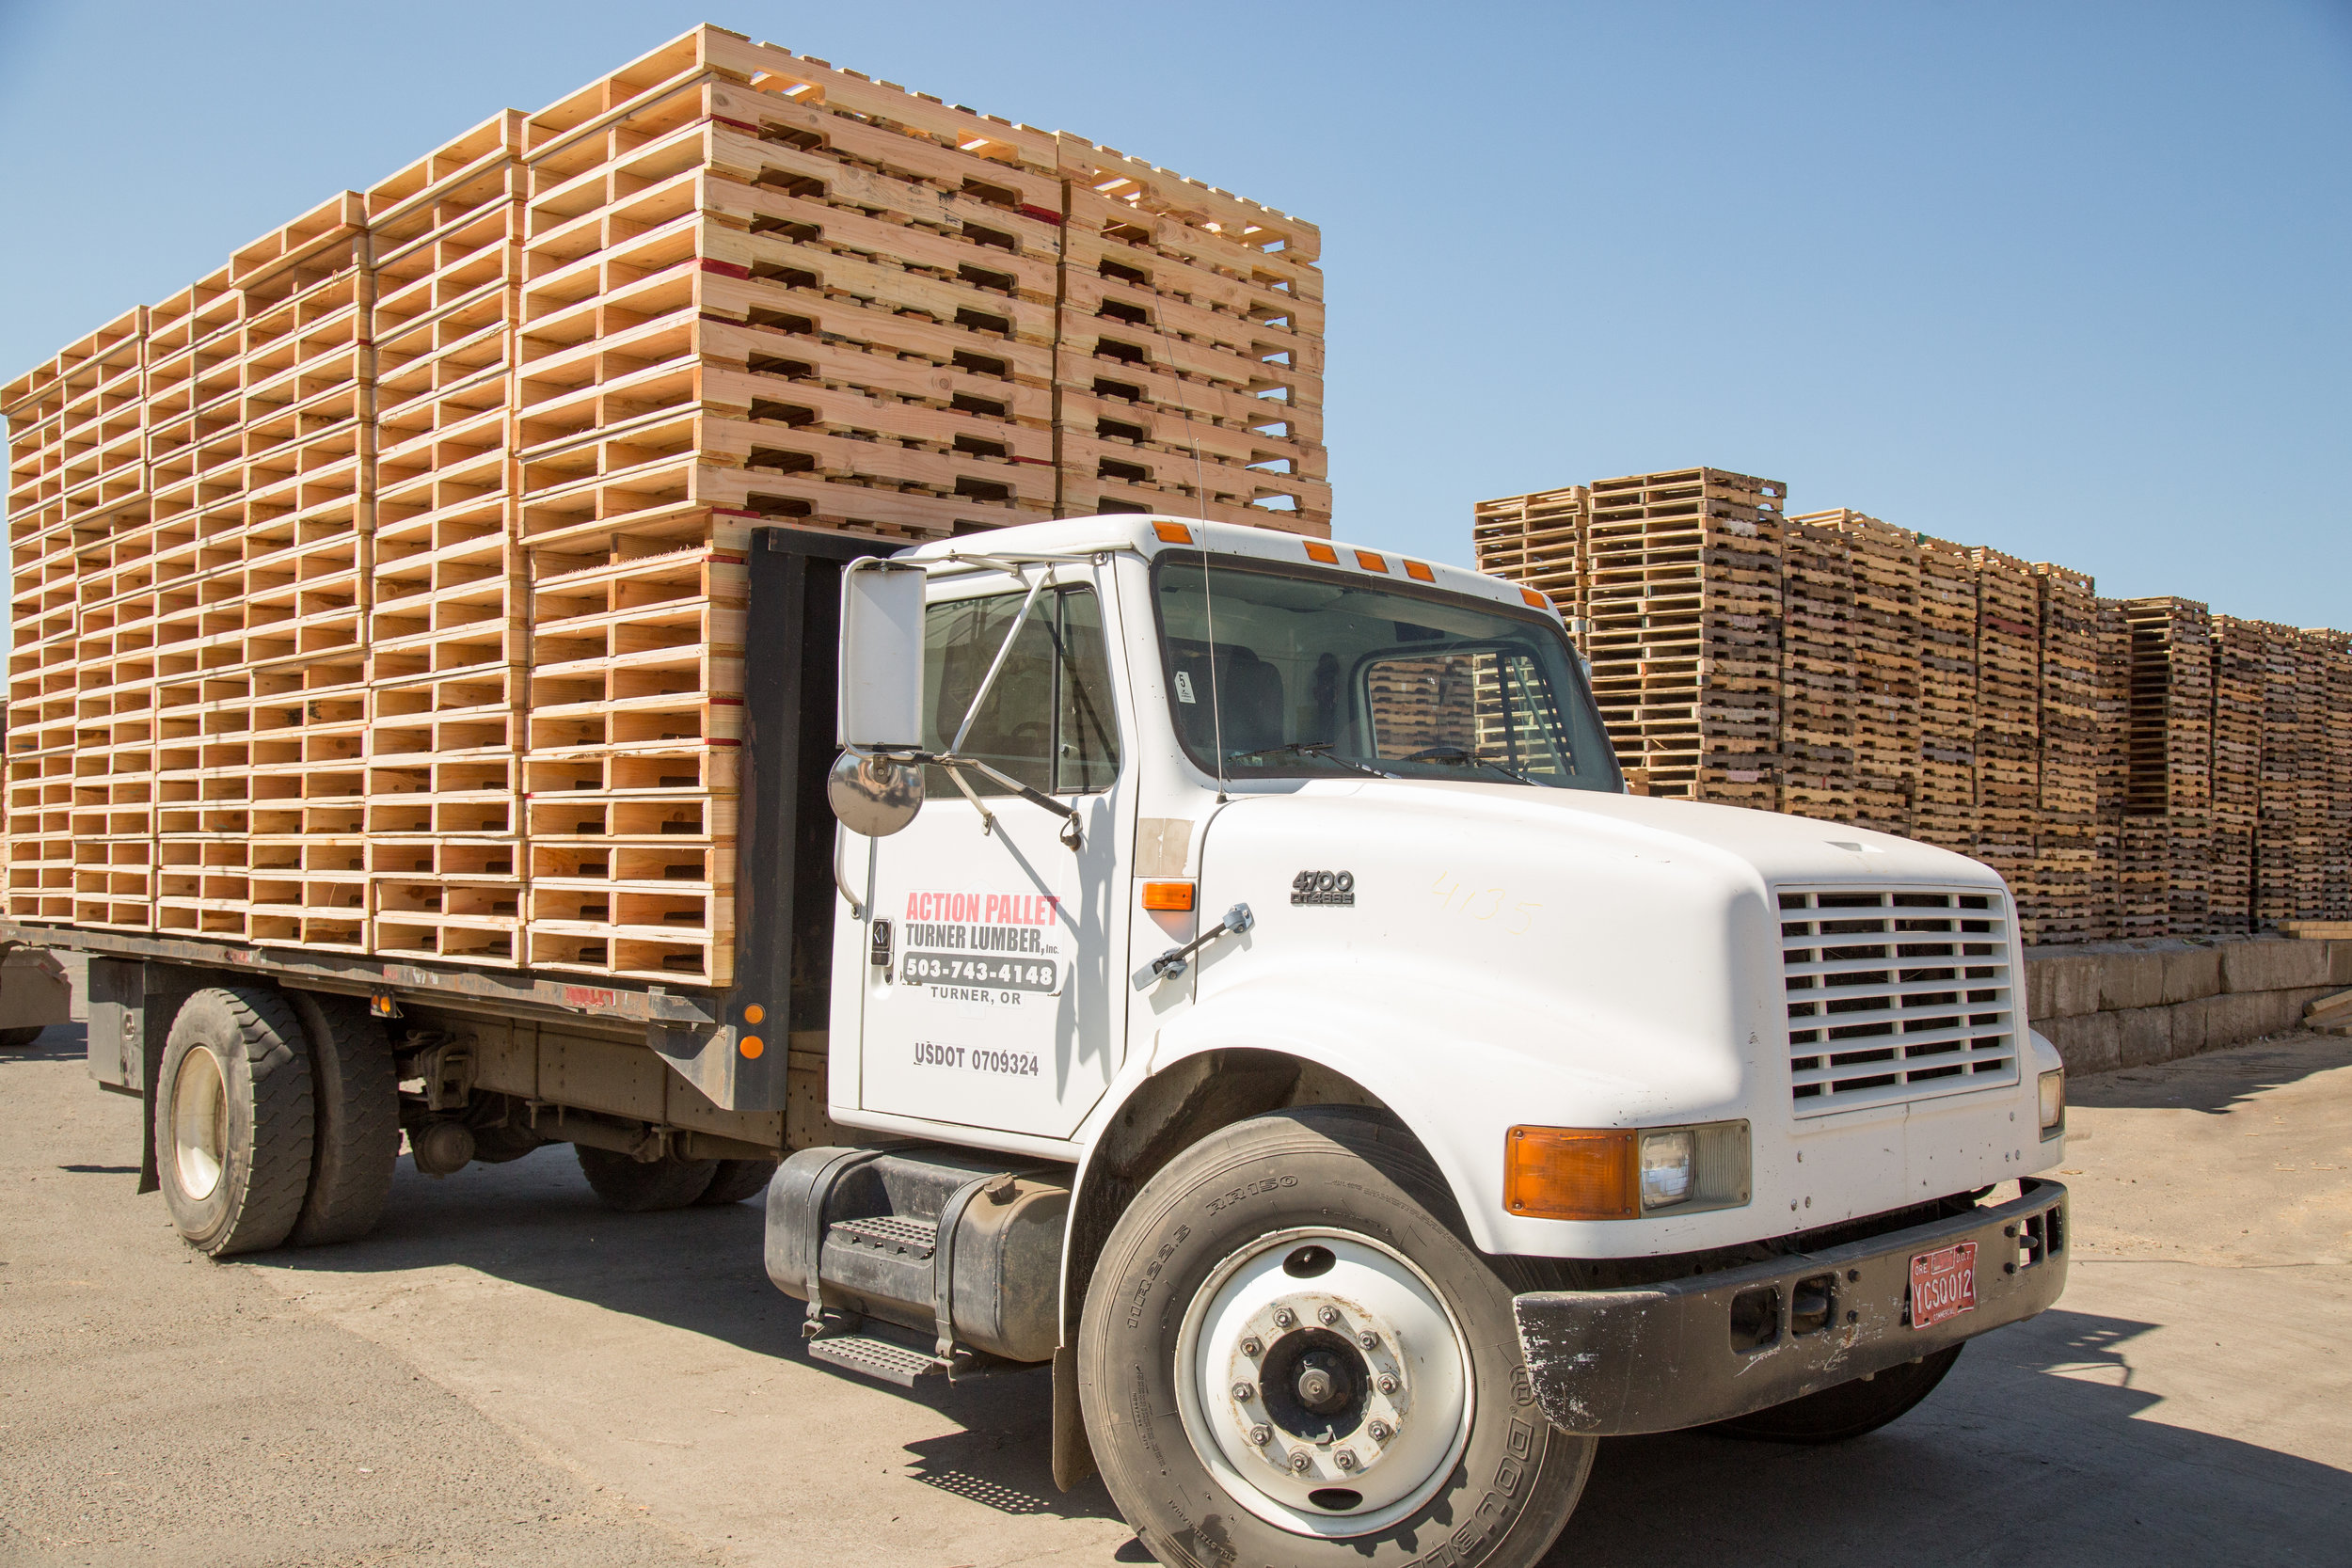 Copy of Turner Lumber Products and Business Photos 2019 (127).jpg